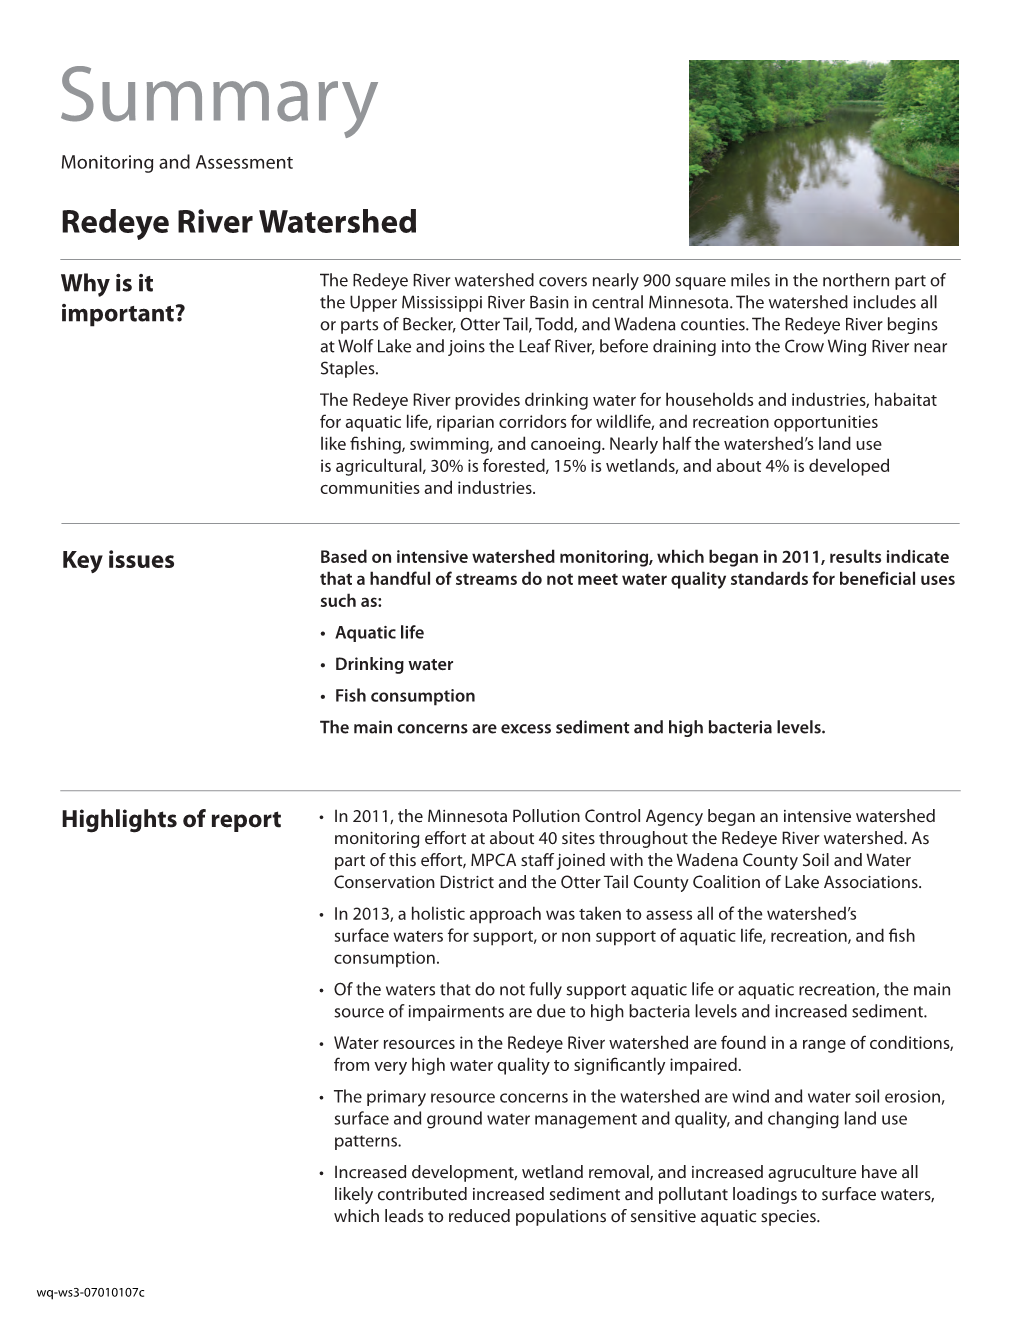 Redeye River Watershed Monitoring and Assessment Report